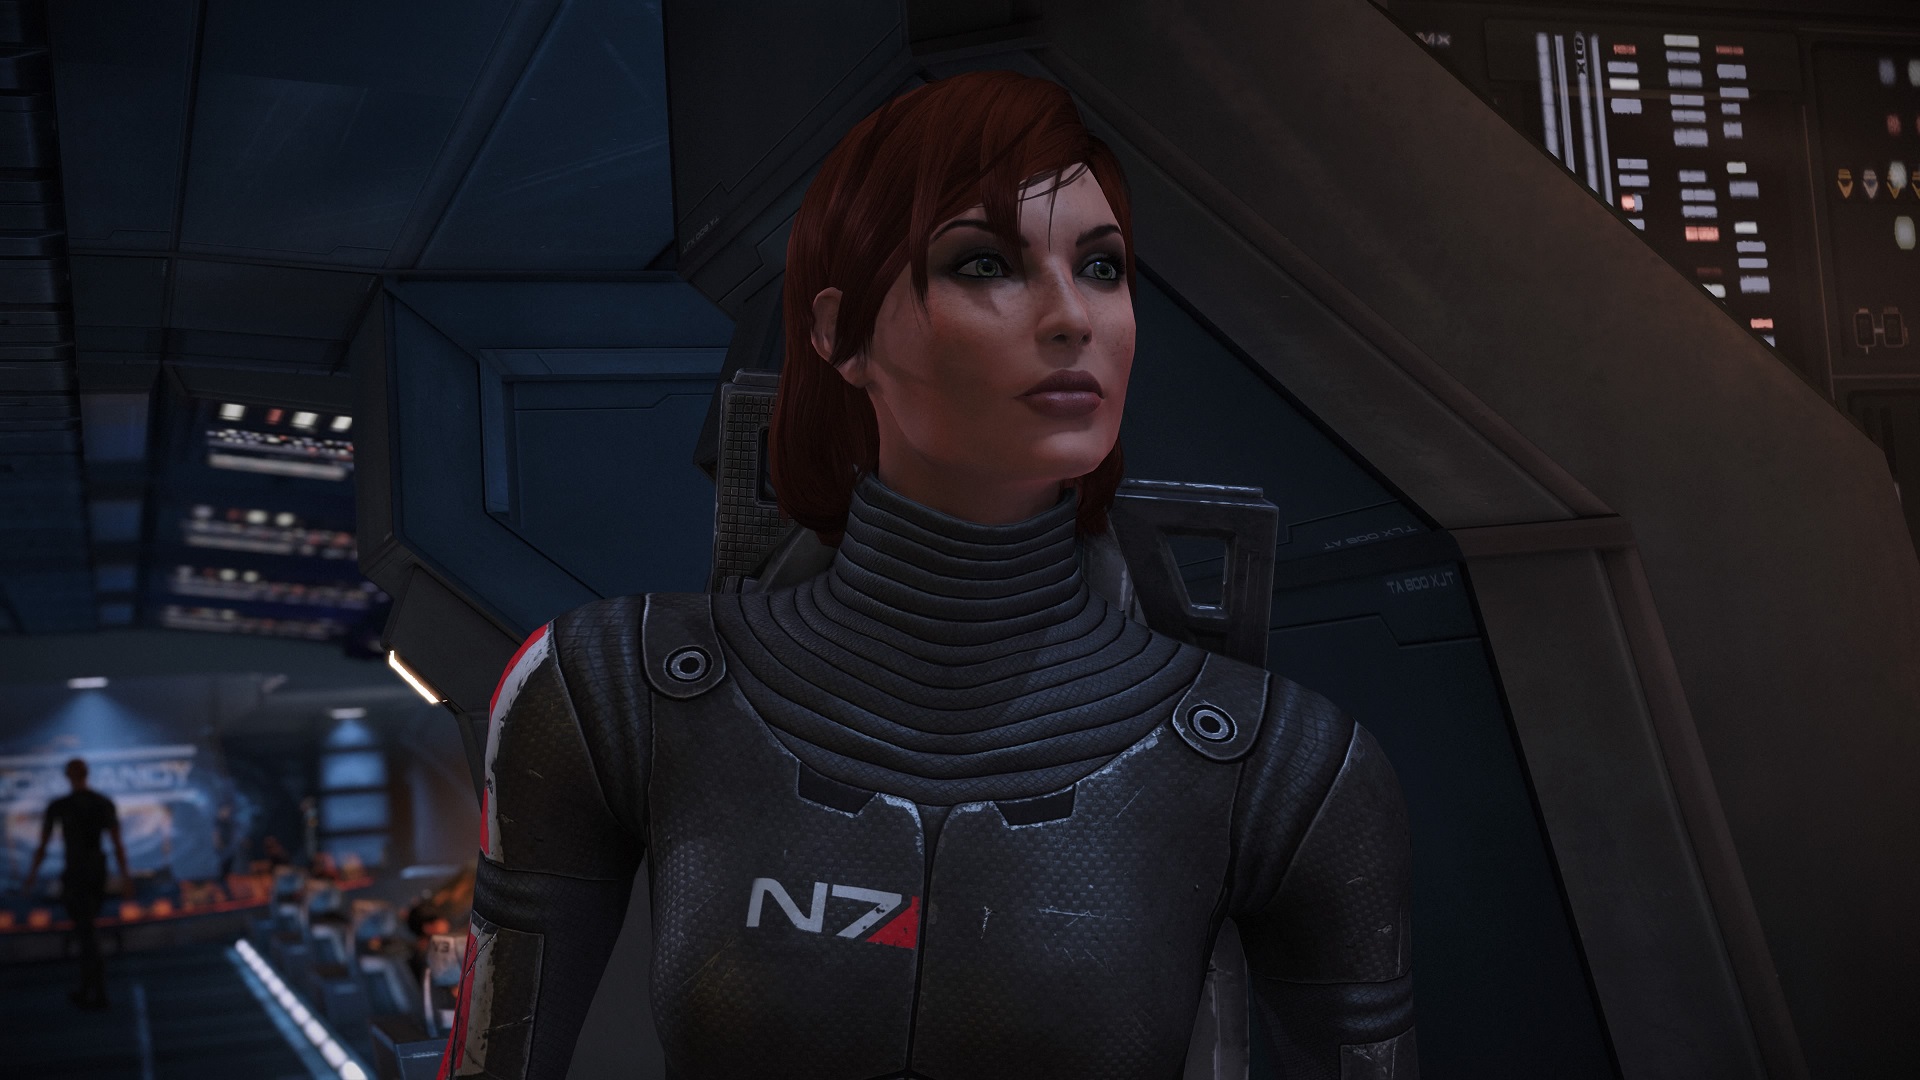 I want Mass Effect 5 to star Commander Shepard, but I know it’s not the right move